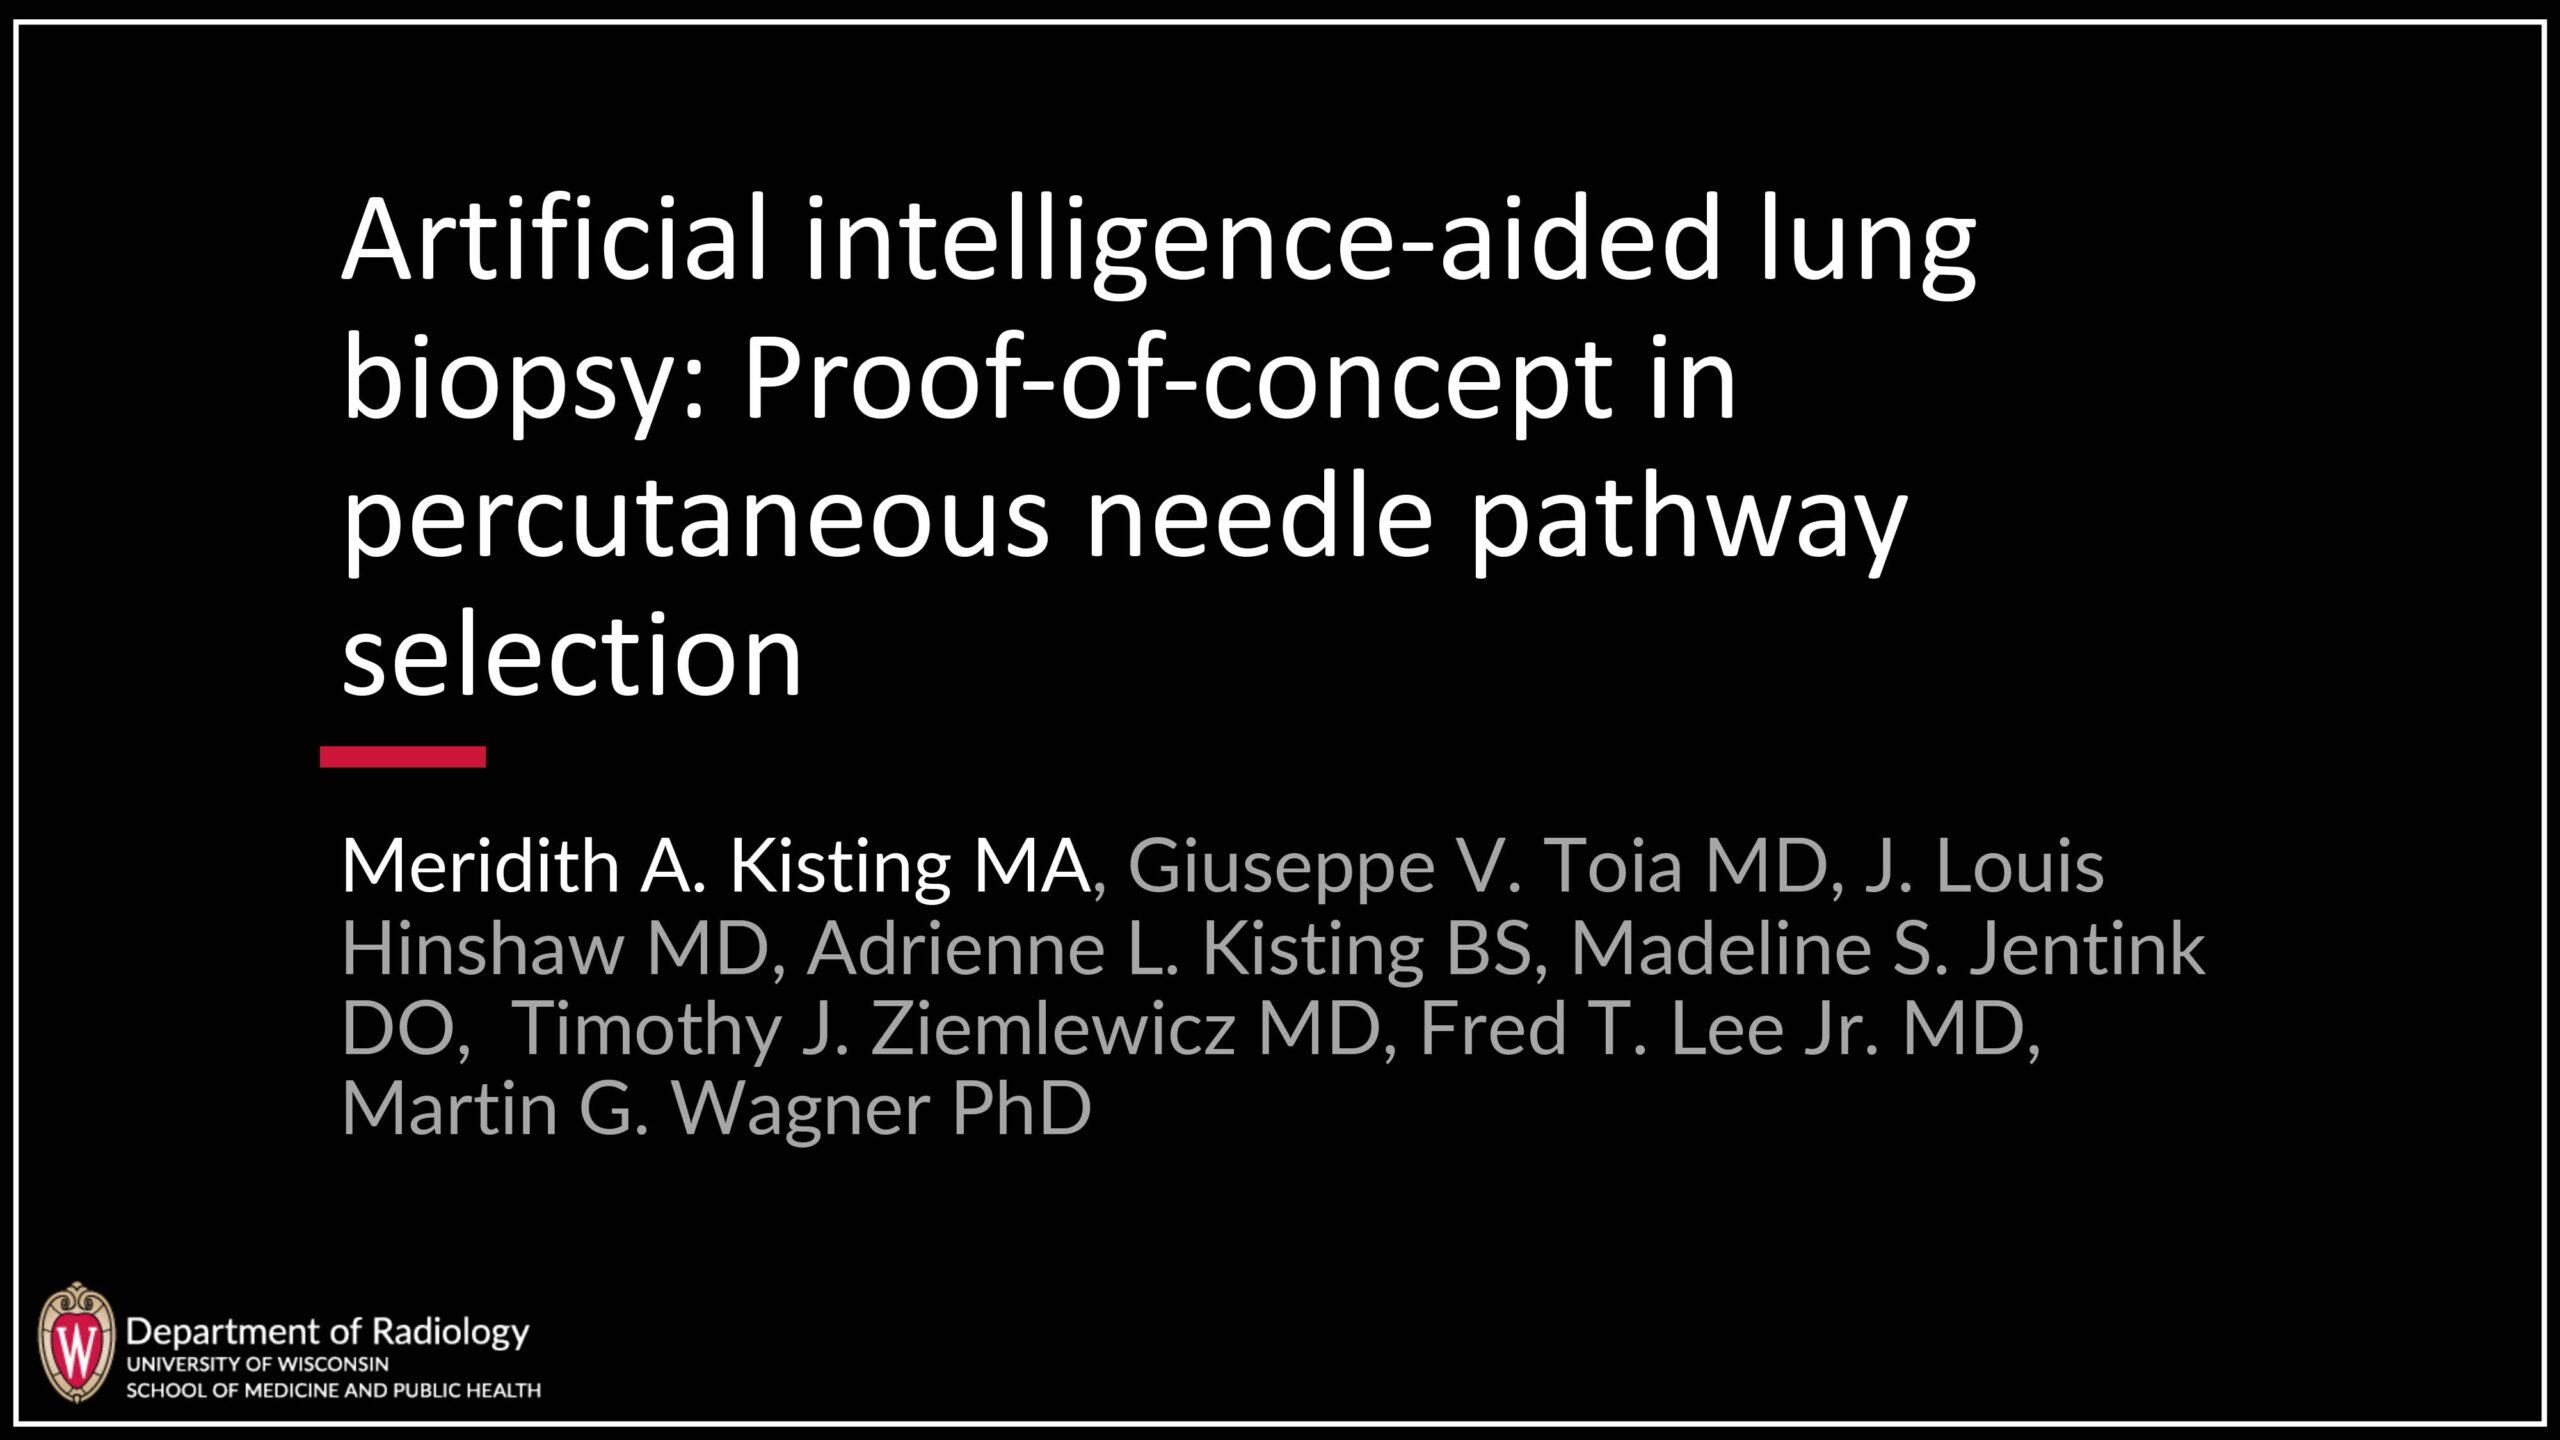 Artificial Intelligence-Aided Lung Biopsy: Proof-of-Concept in Percutaneous Needle Pathway Selection